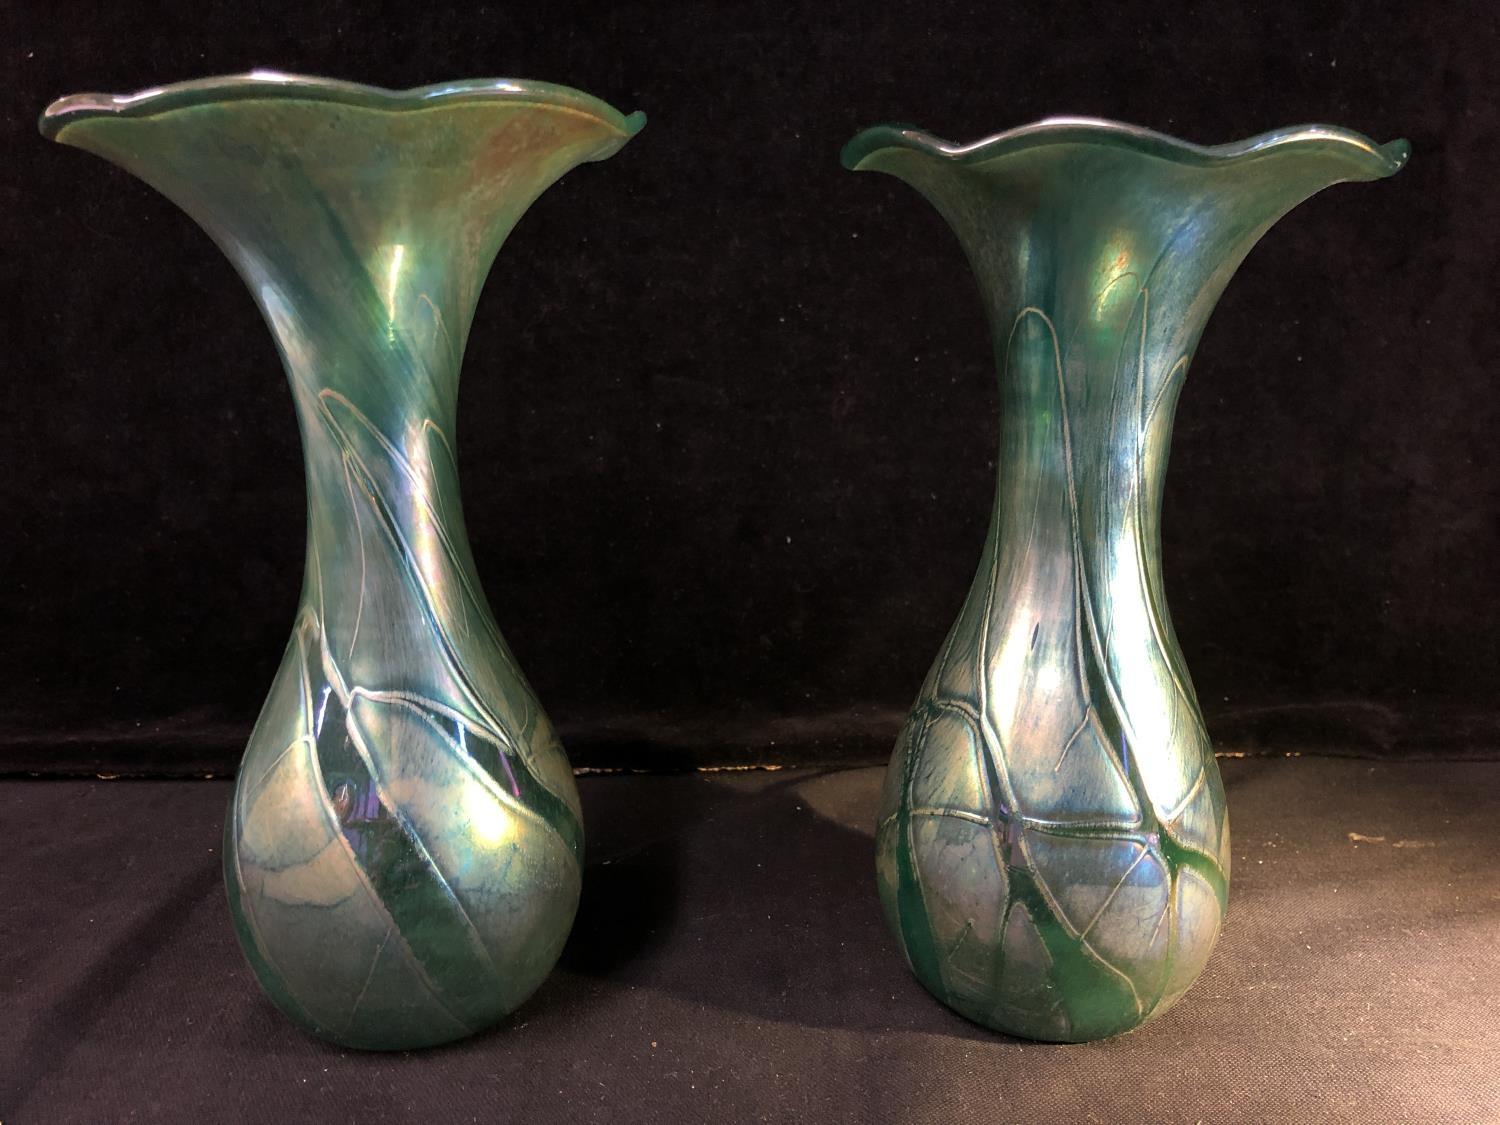 Isle of Wight- A pair of convolvulus bud form glass vases of nacreous green blue colour, 21.5cm